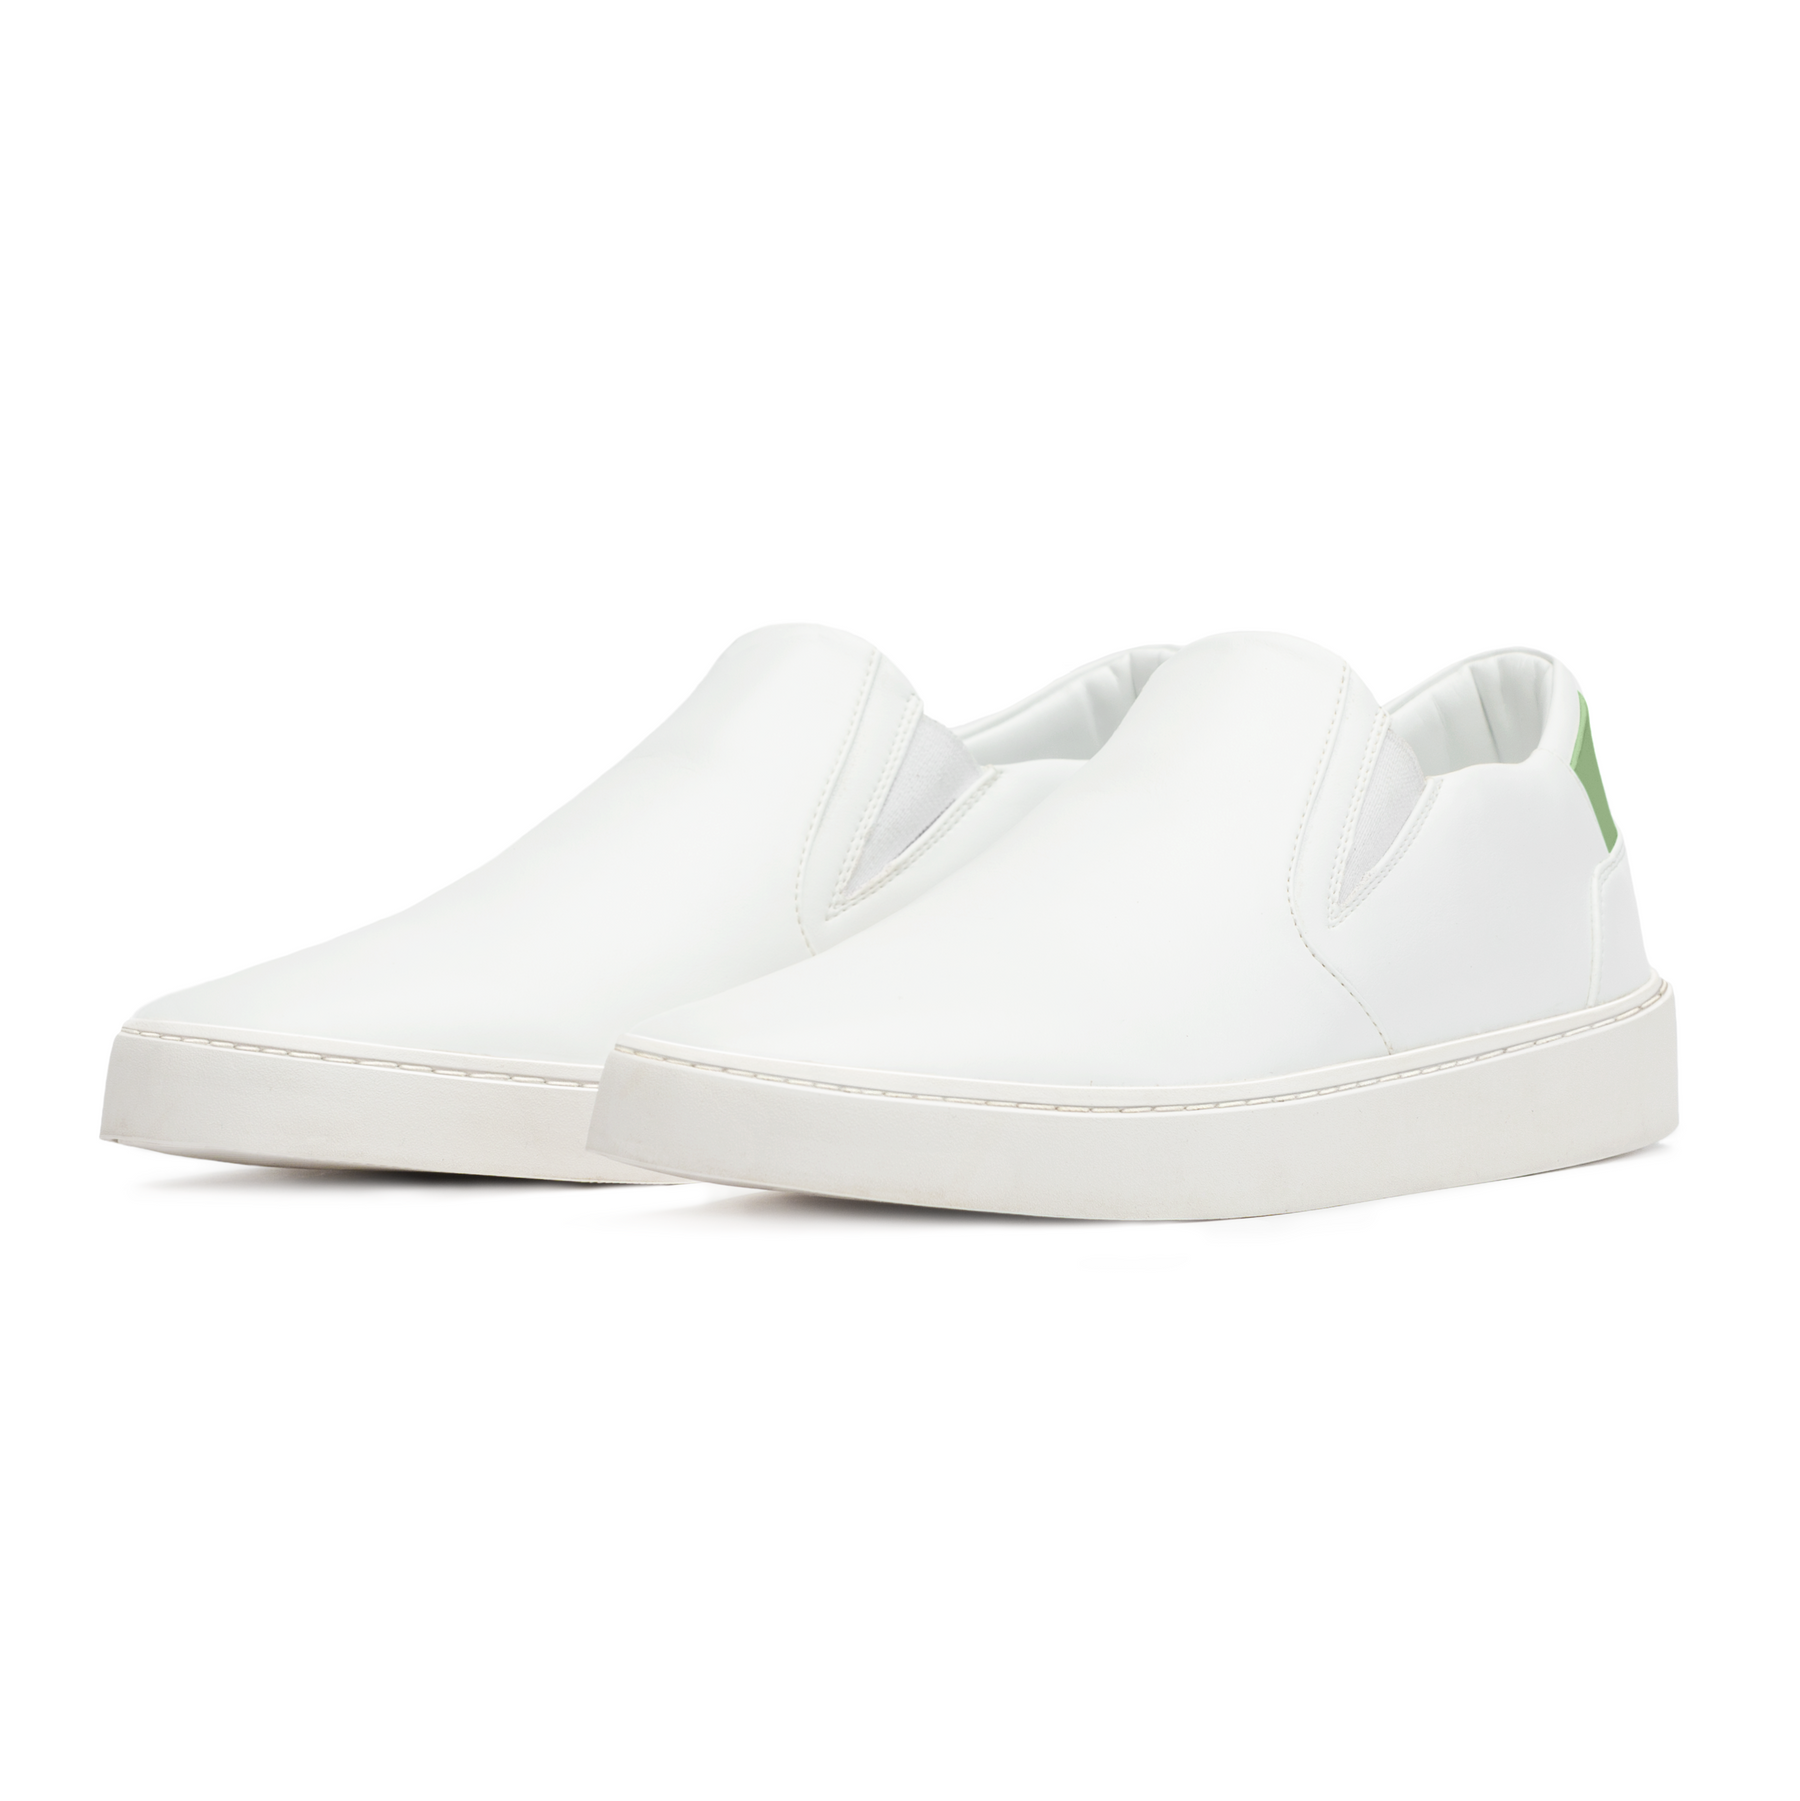 white slip ons with green upper back heel ethically made